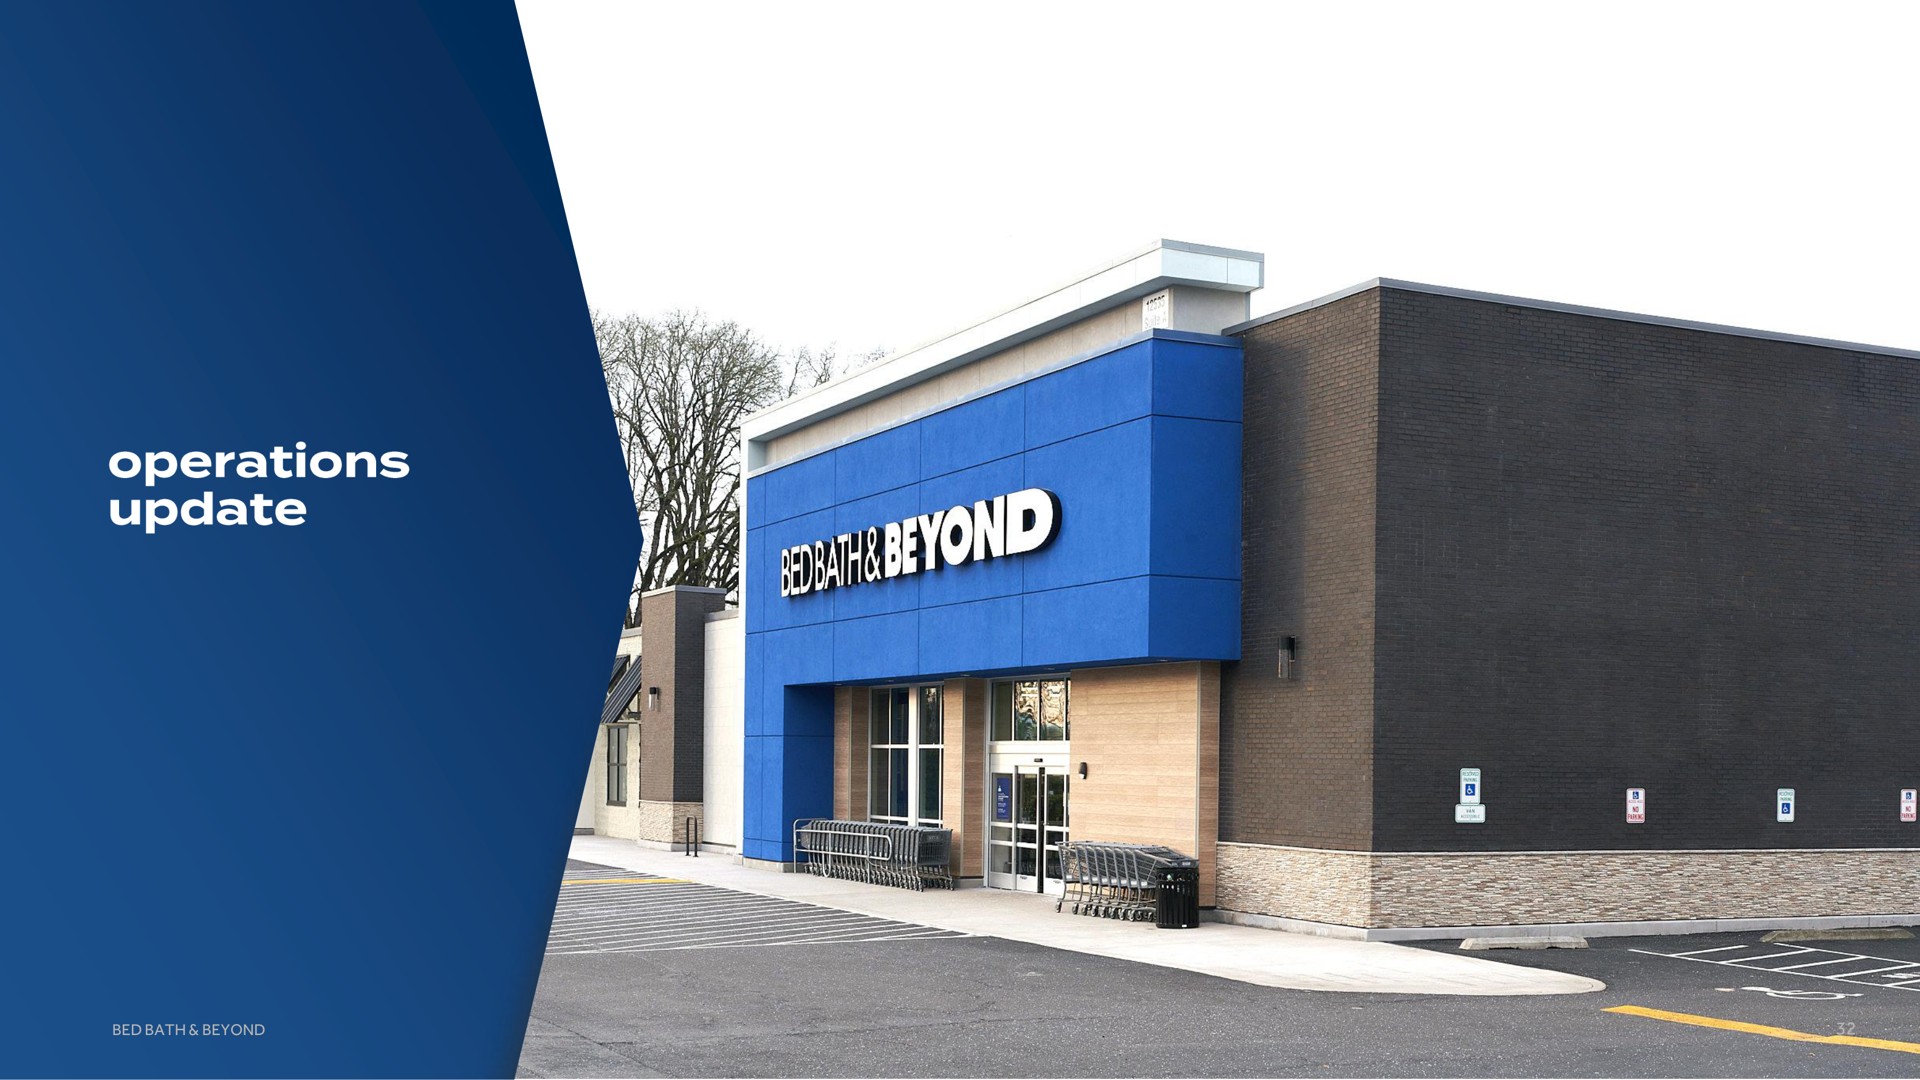 operations update | Bed Bath & Beyond